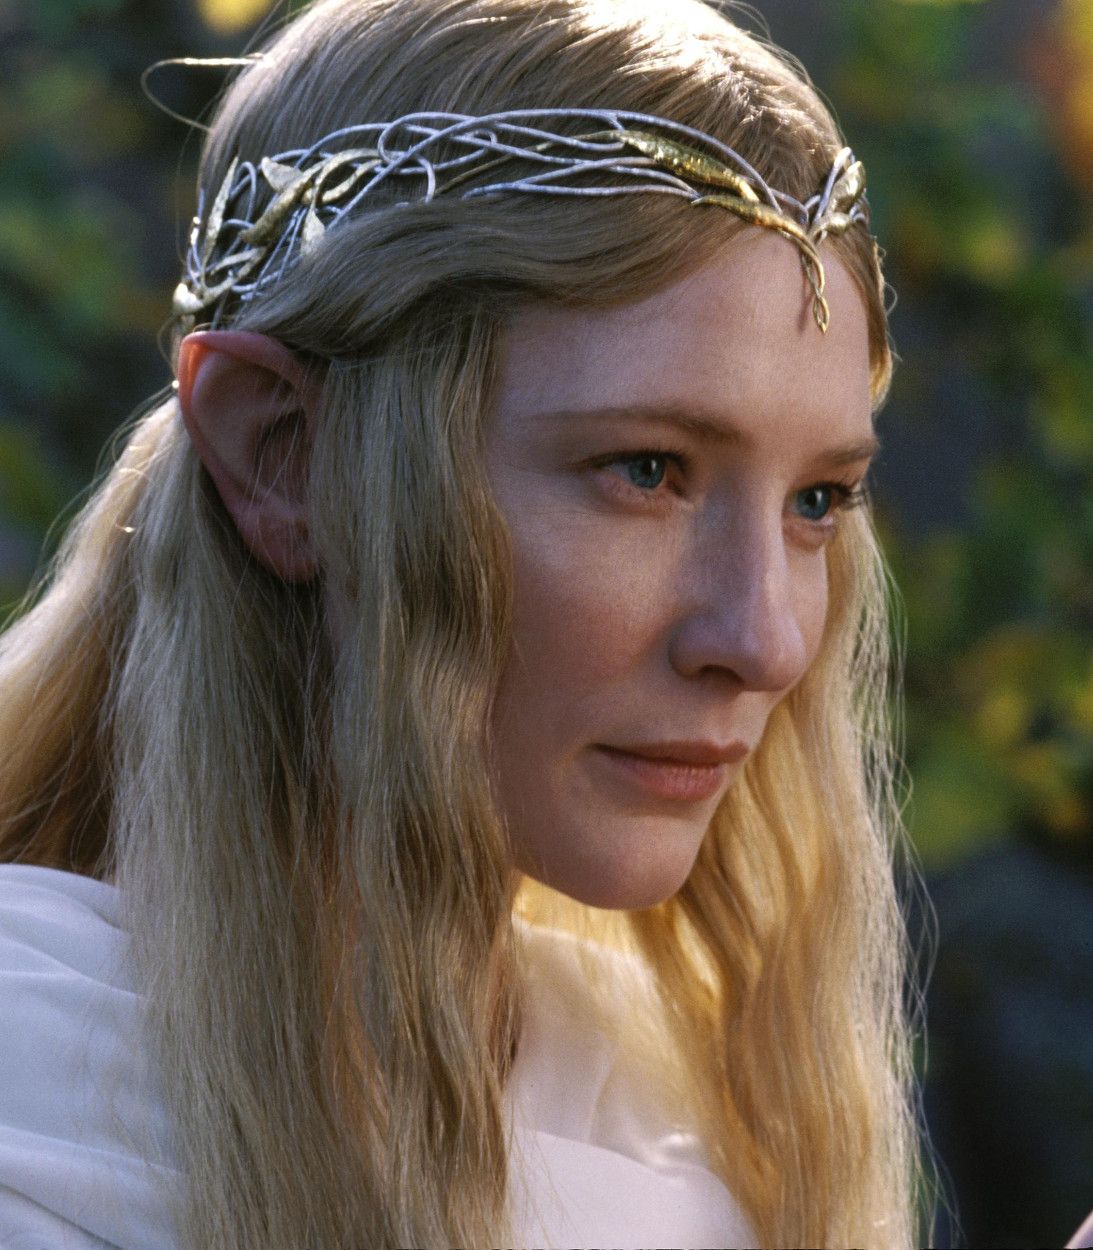 Cate Blanchett as Galadriel In Lord Of The Rings